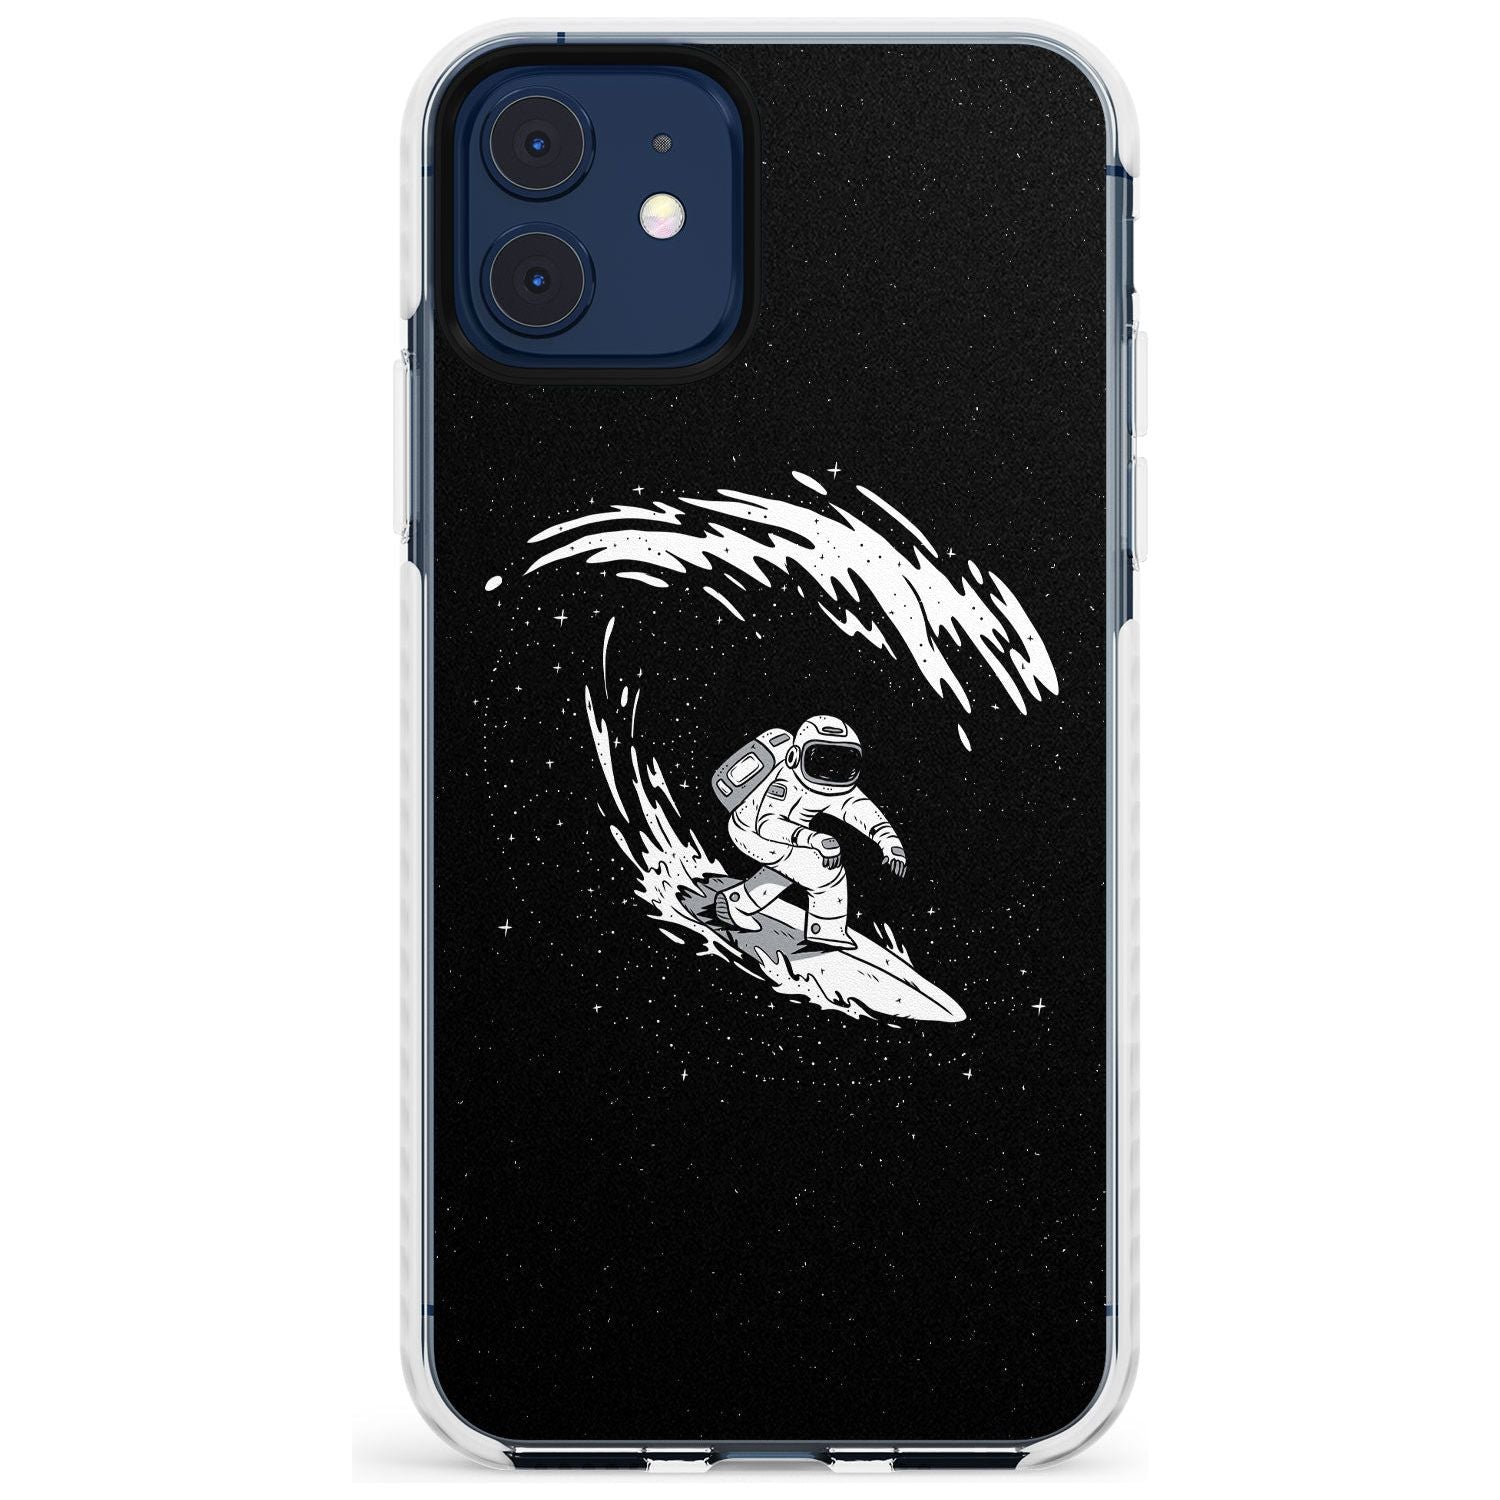 Surfing Astronaut Slim TPU Phone Case for iPhone 11